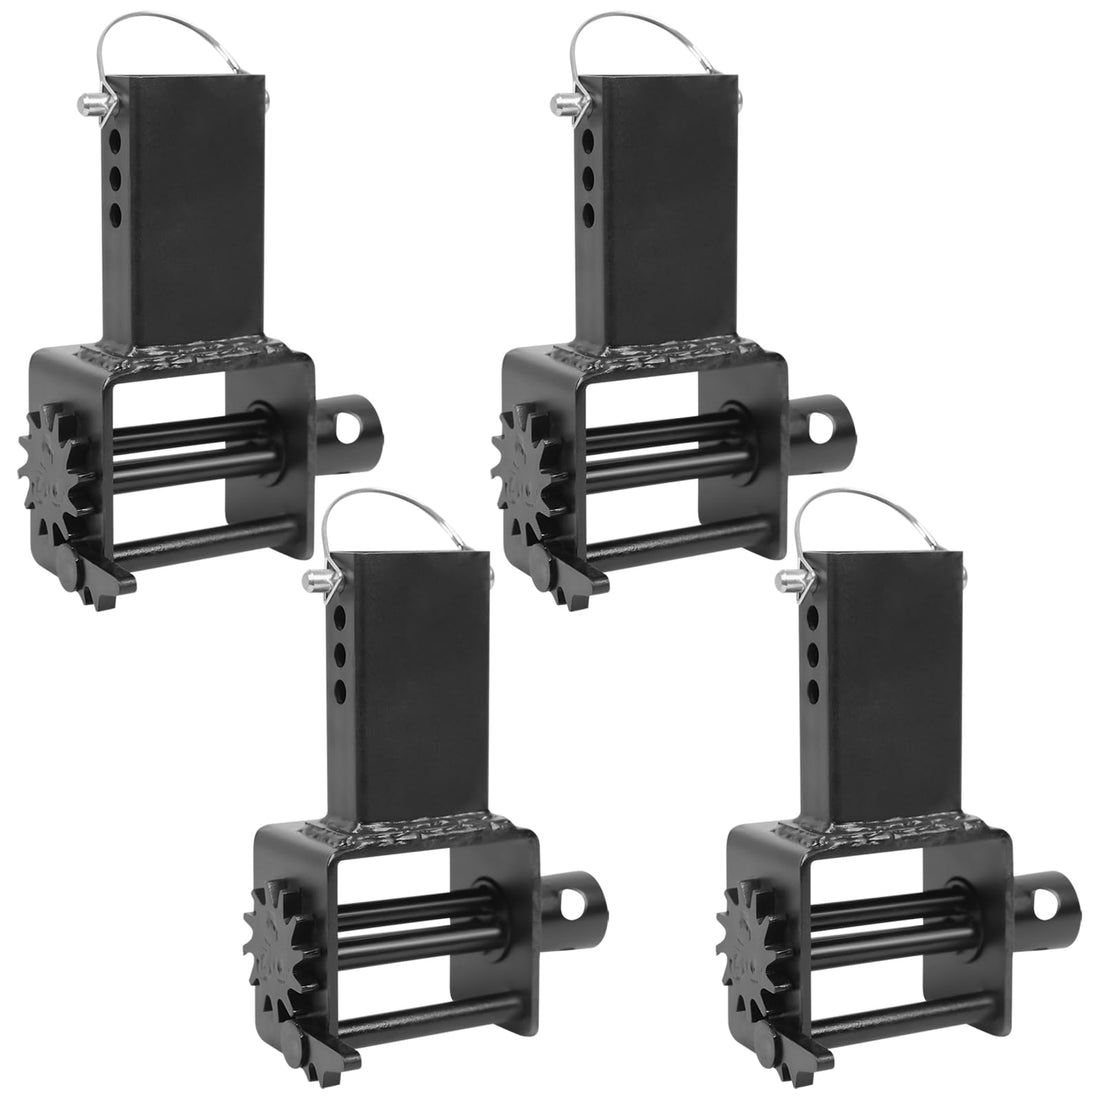 Trailer Stake Pocket Winch Heavy Duty Flatbed Trailer Tool with Standard Size Winch Bar 4pcs